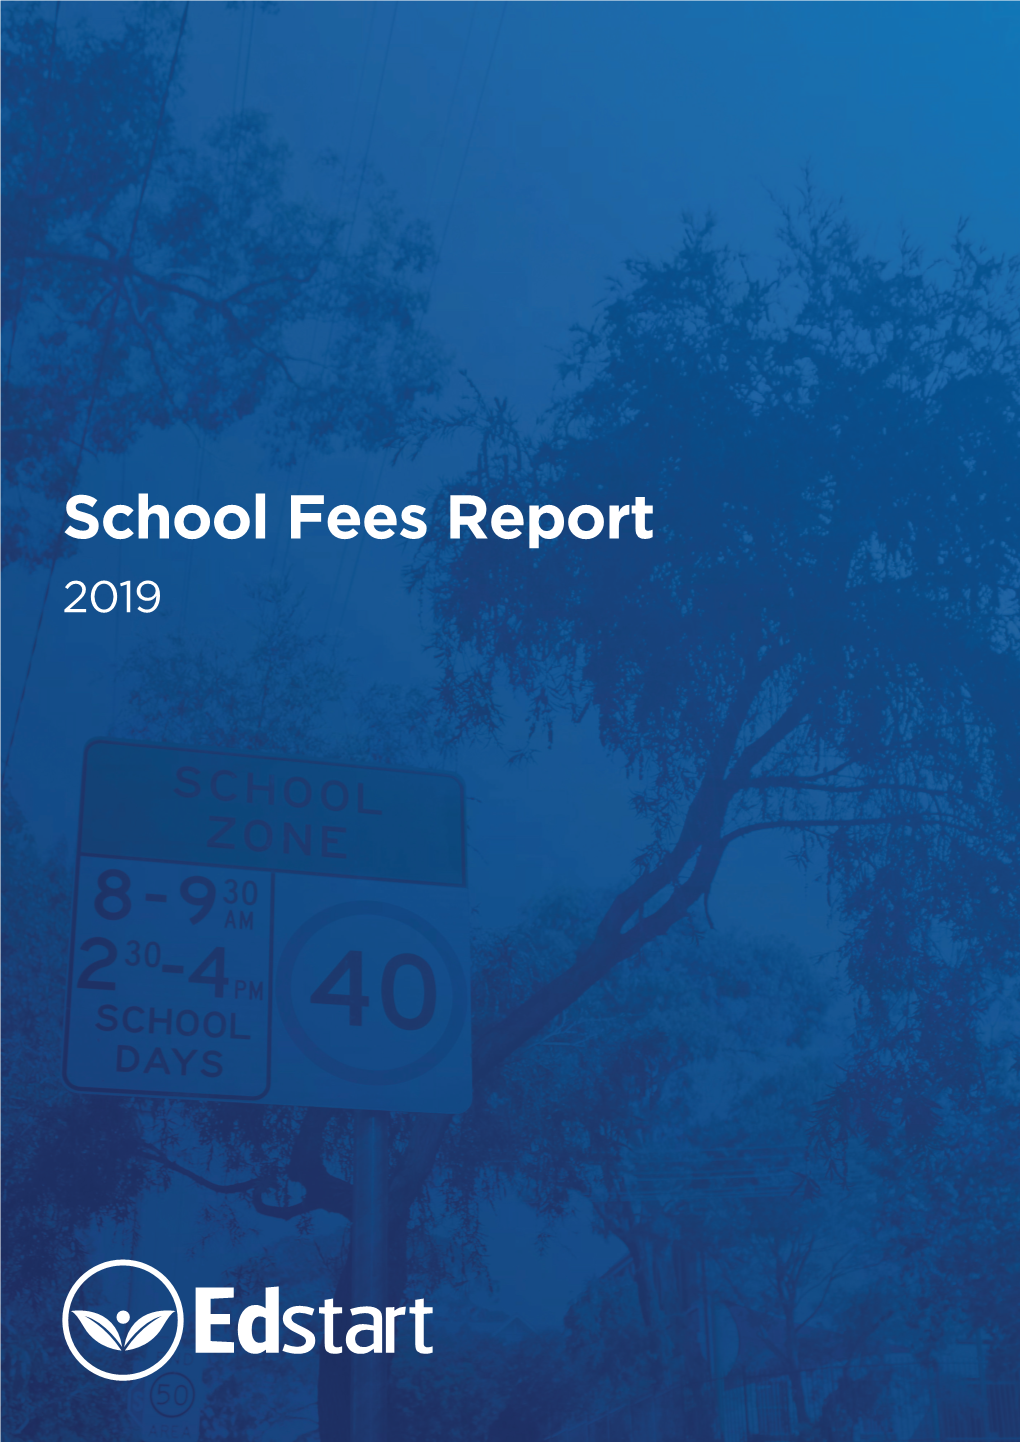 School Fees Report 2019 Introduction